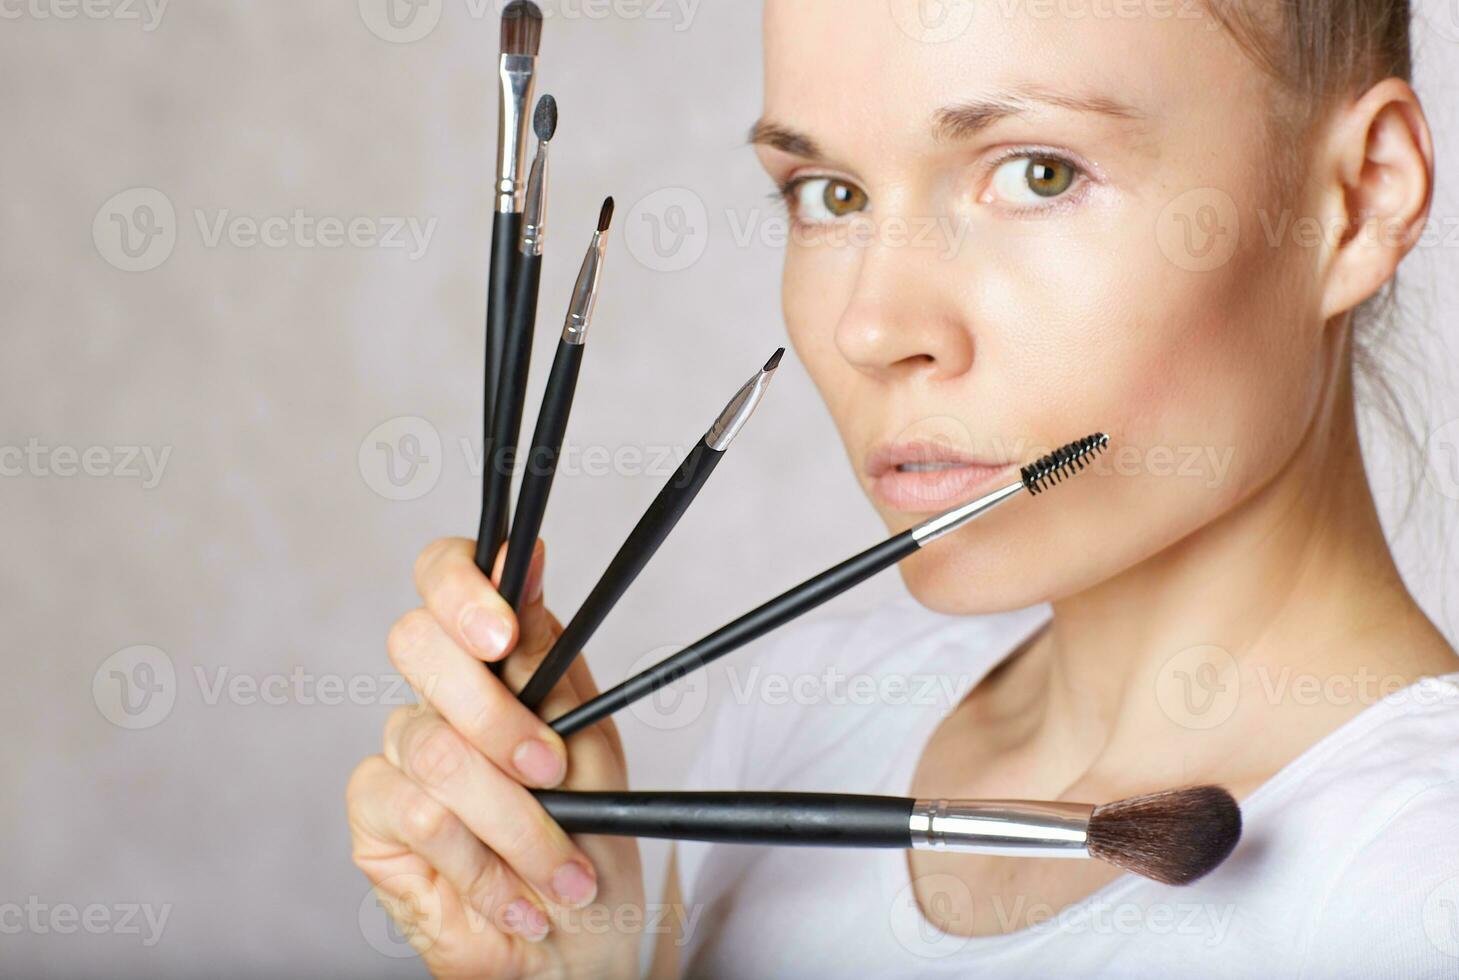 Make up brushes kit close to her face of a young lady. Closeup photo